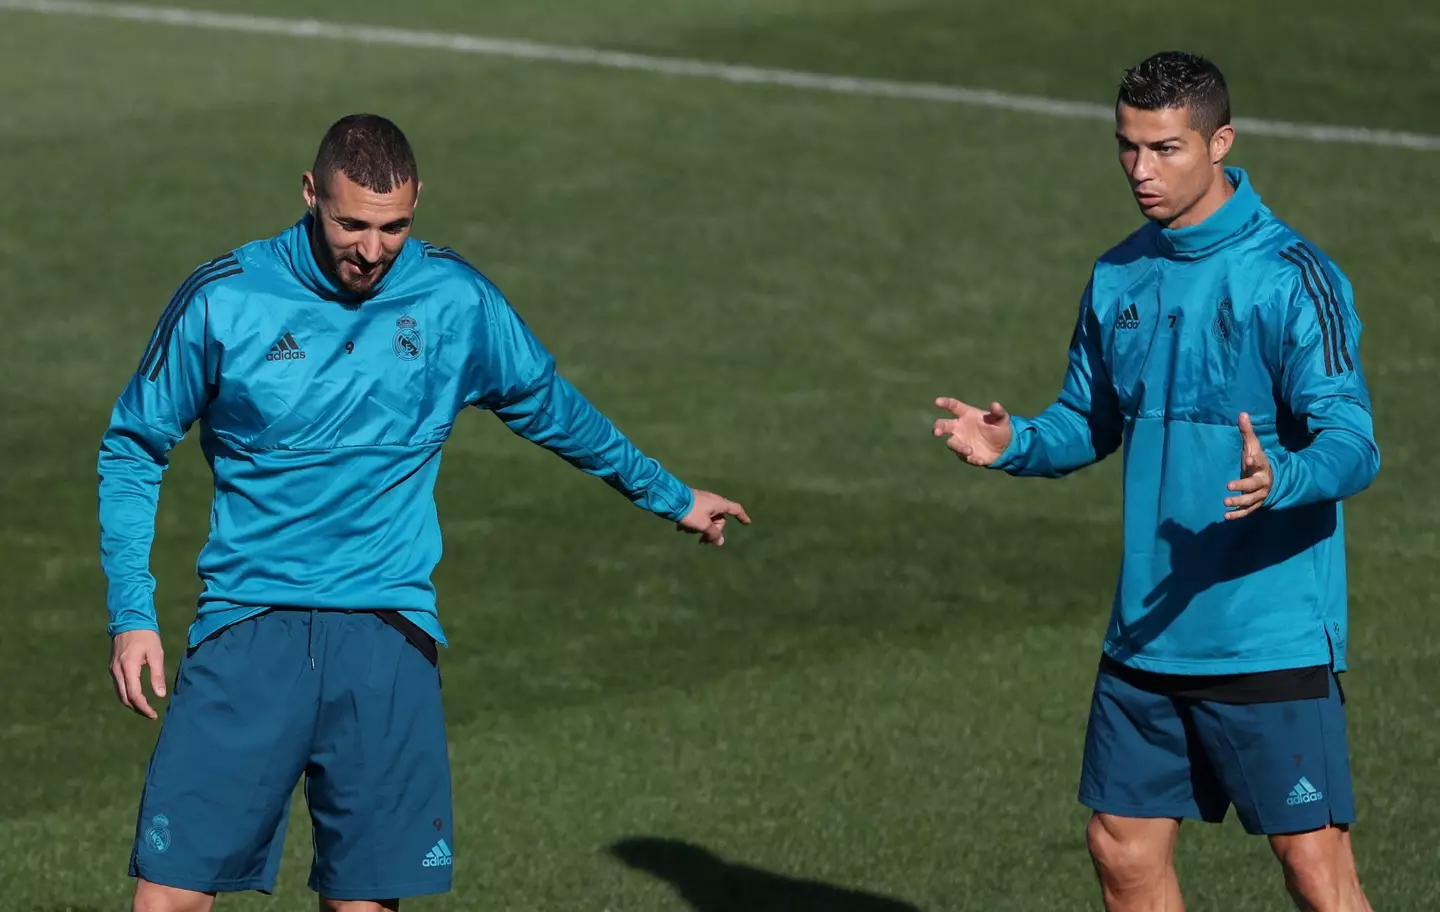 Ronaldo and Benzema have been close friends for years. (Image